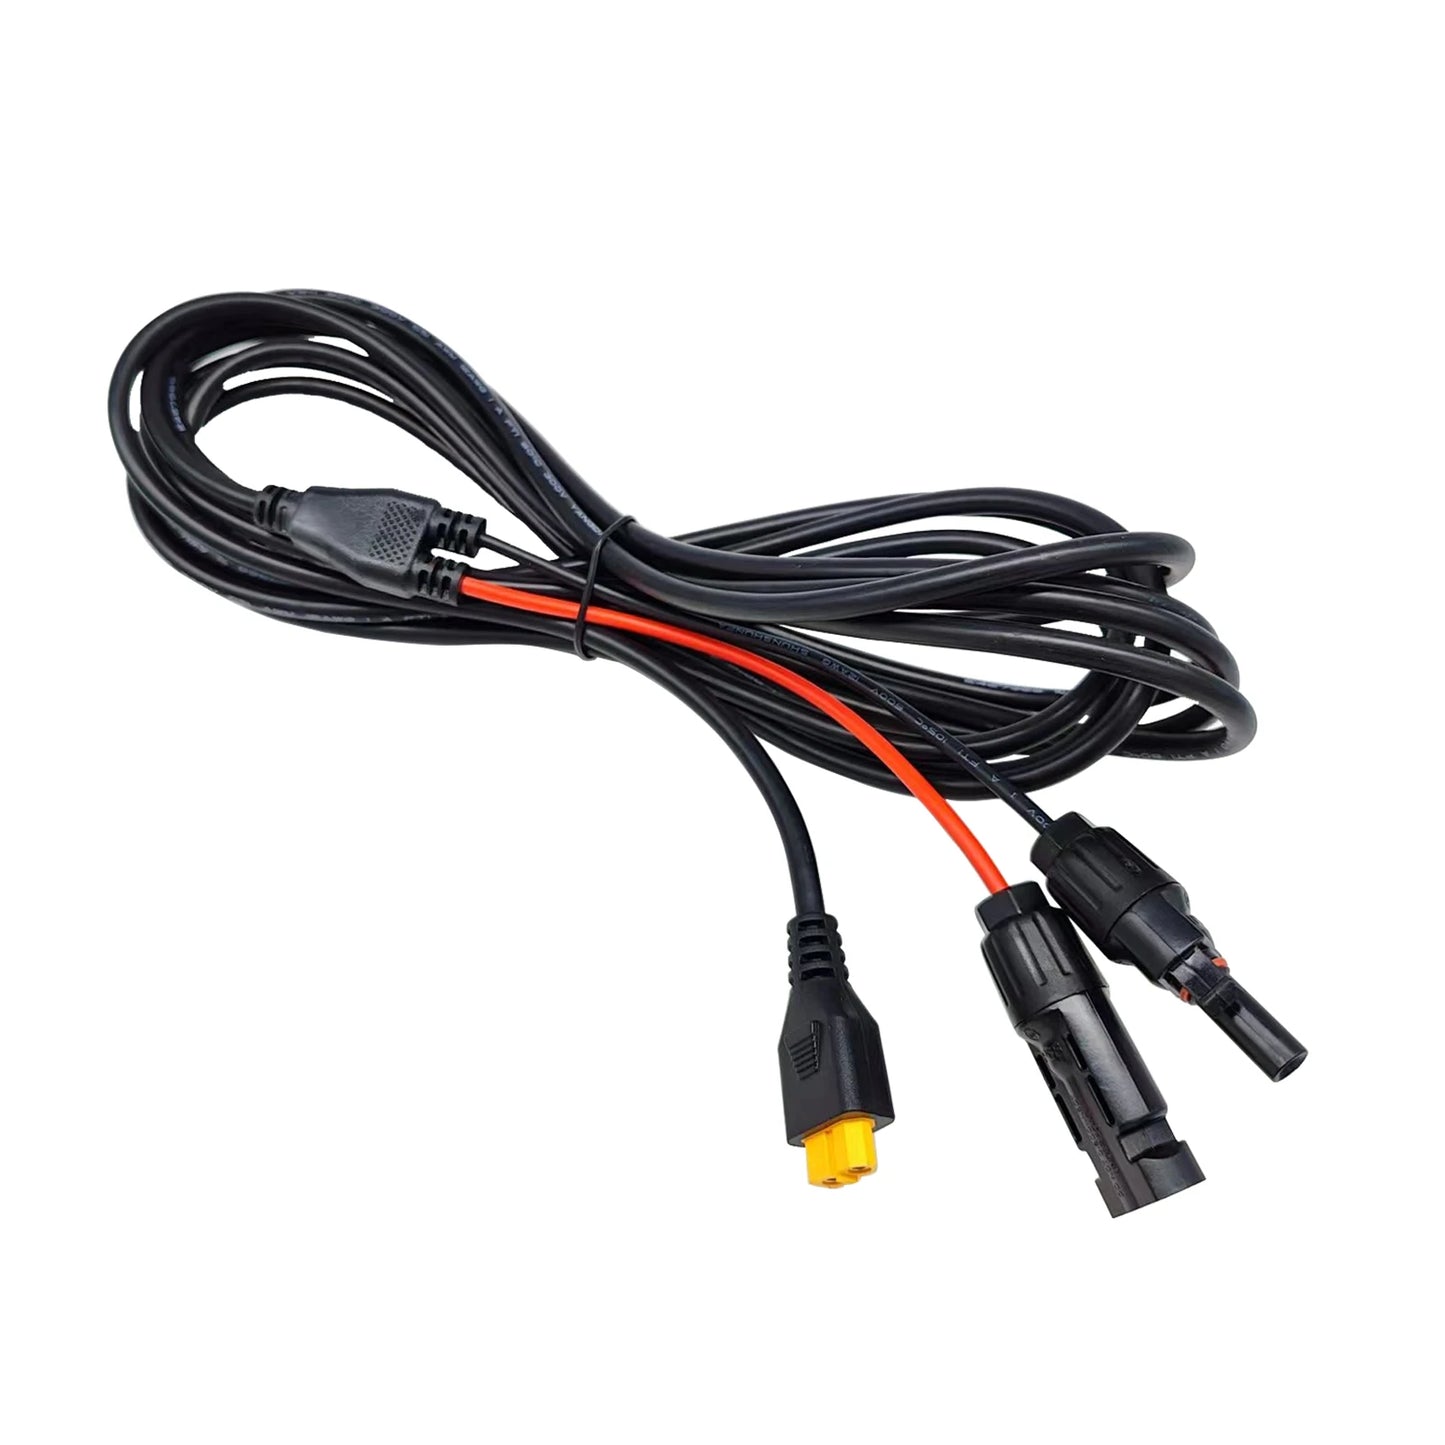 Adapter Cable Compatible with M C 4 Connector 1.8M - Inverted Powers